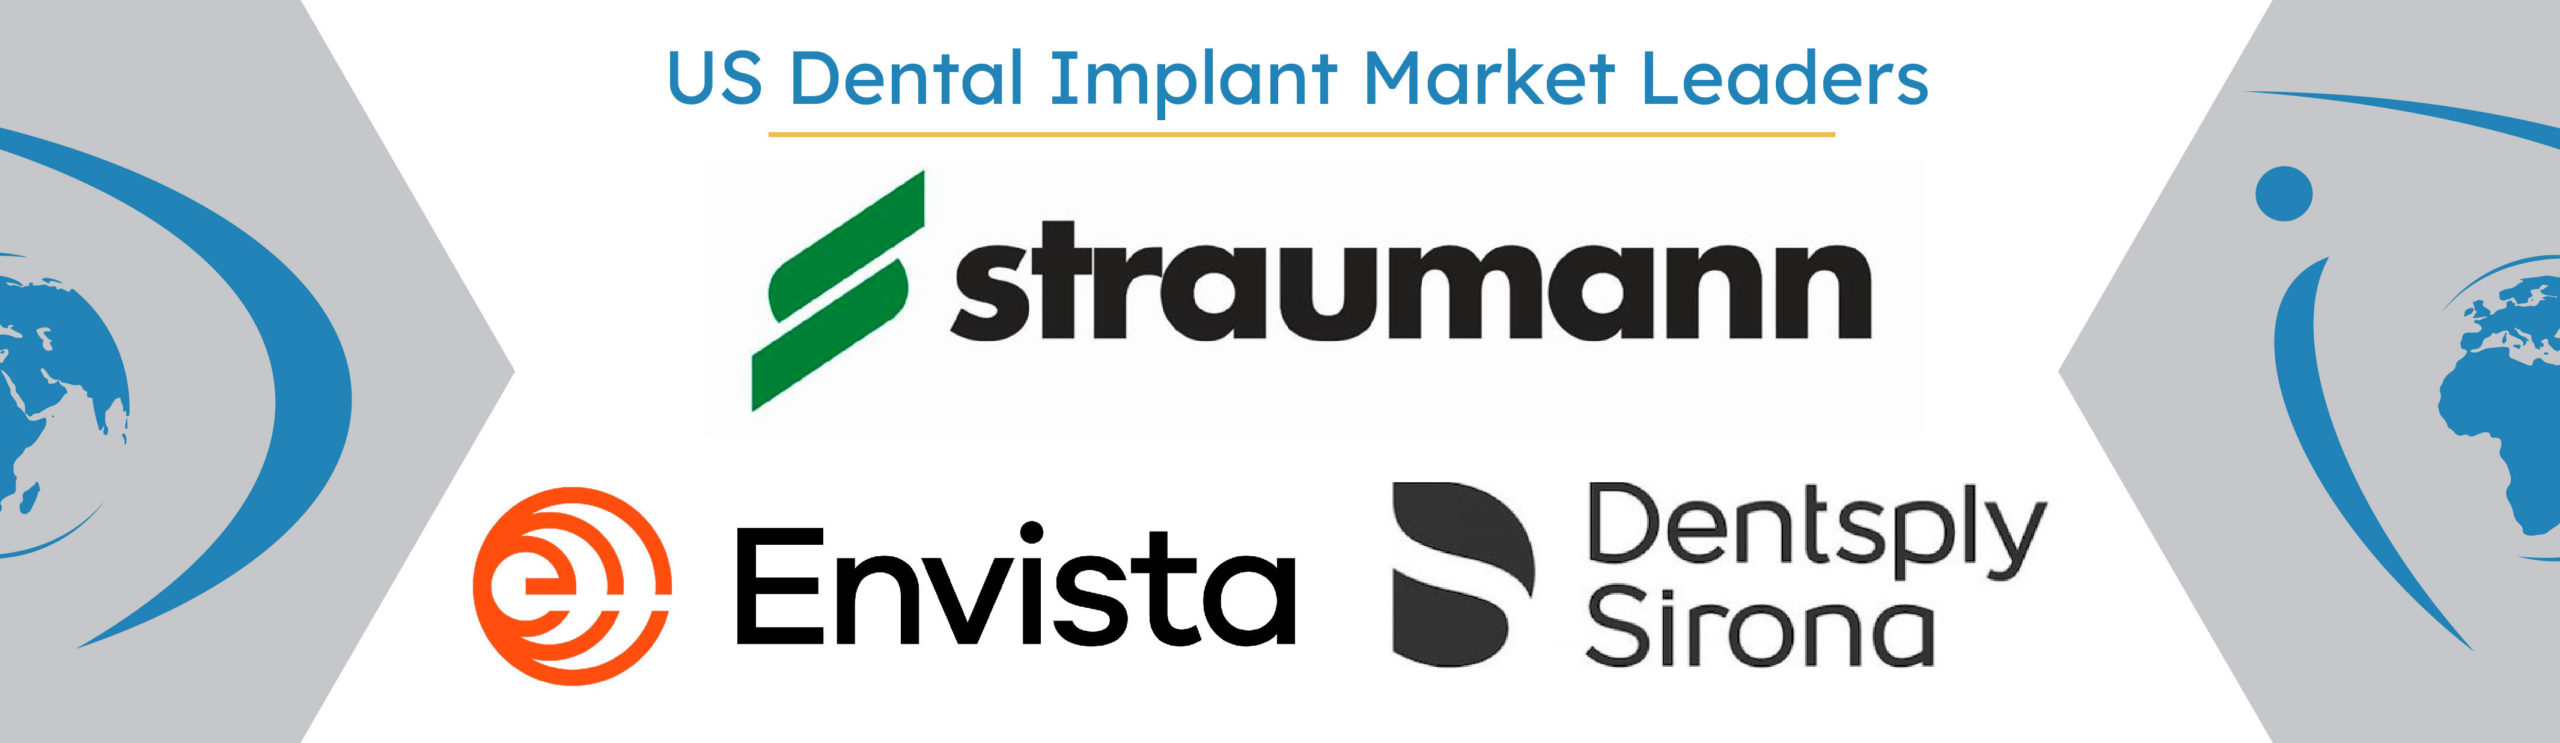 Top Dental Implant Companies in the United States